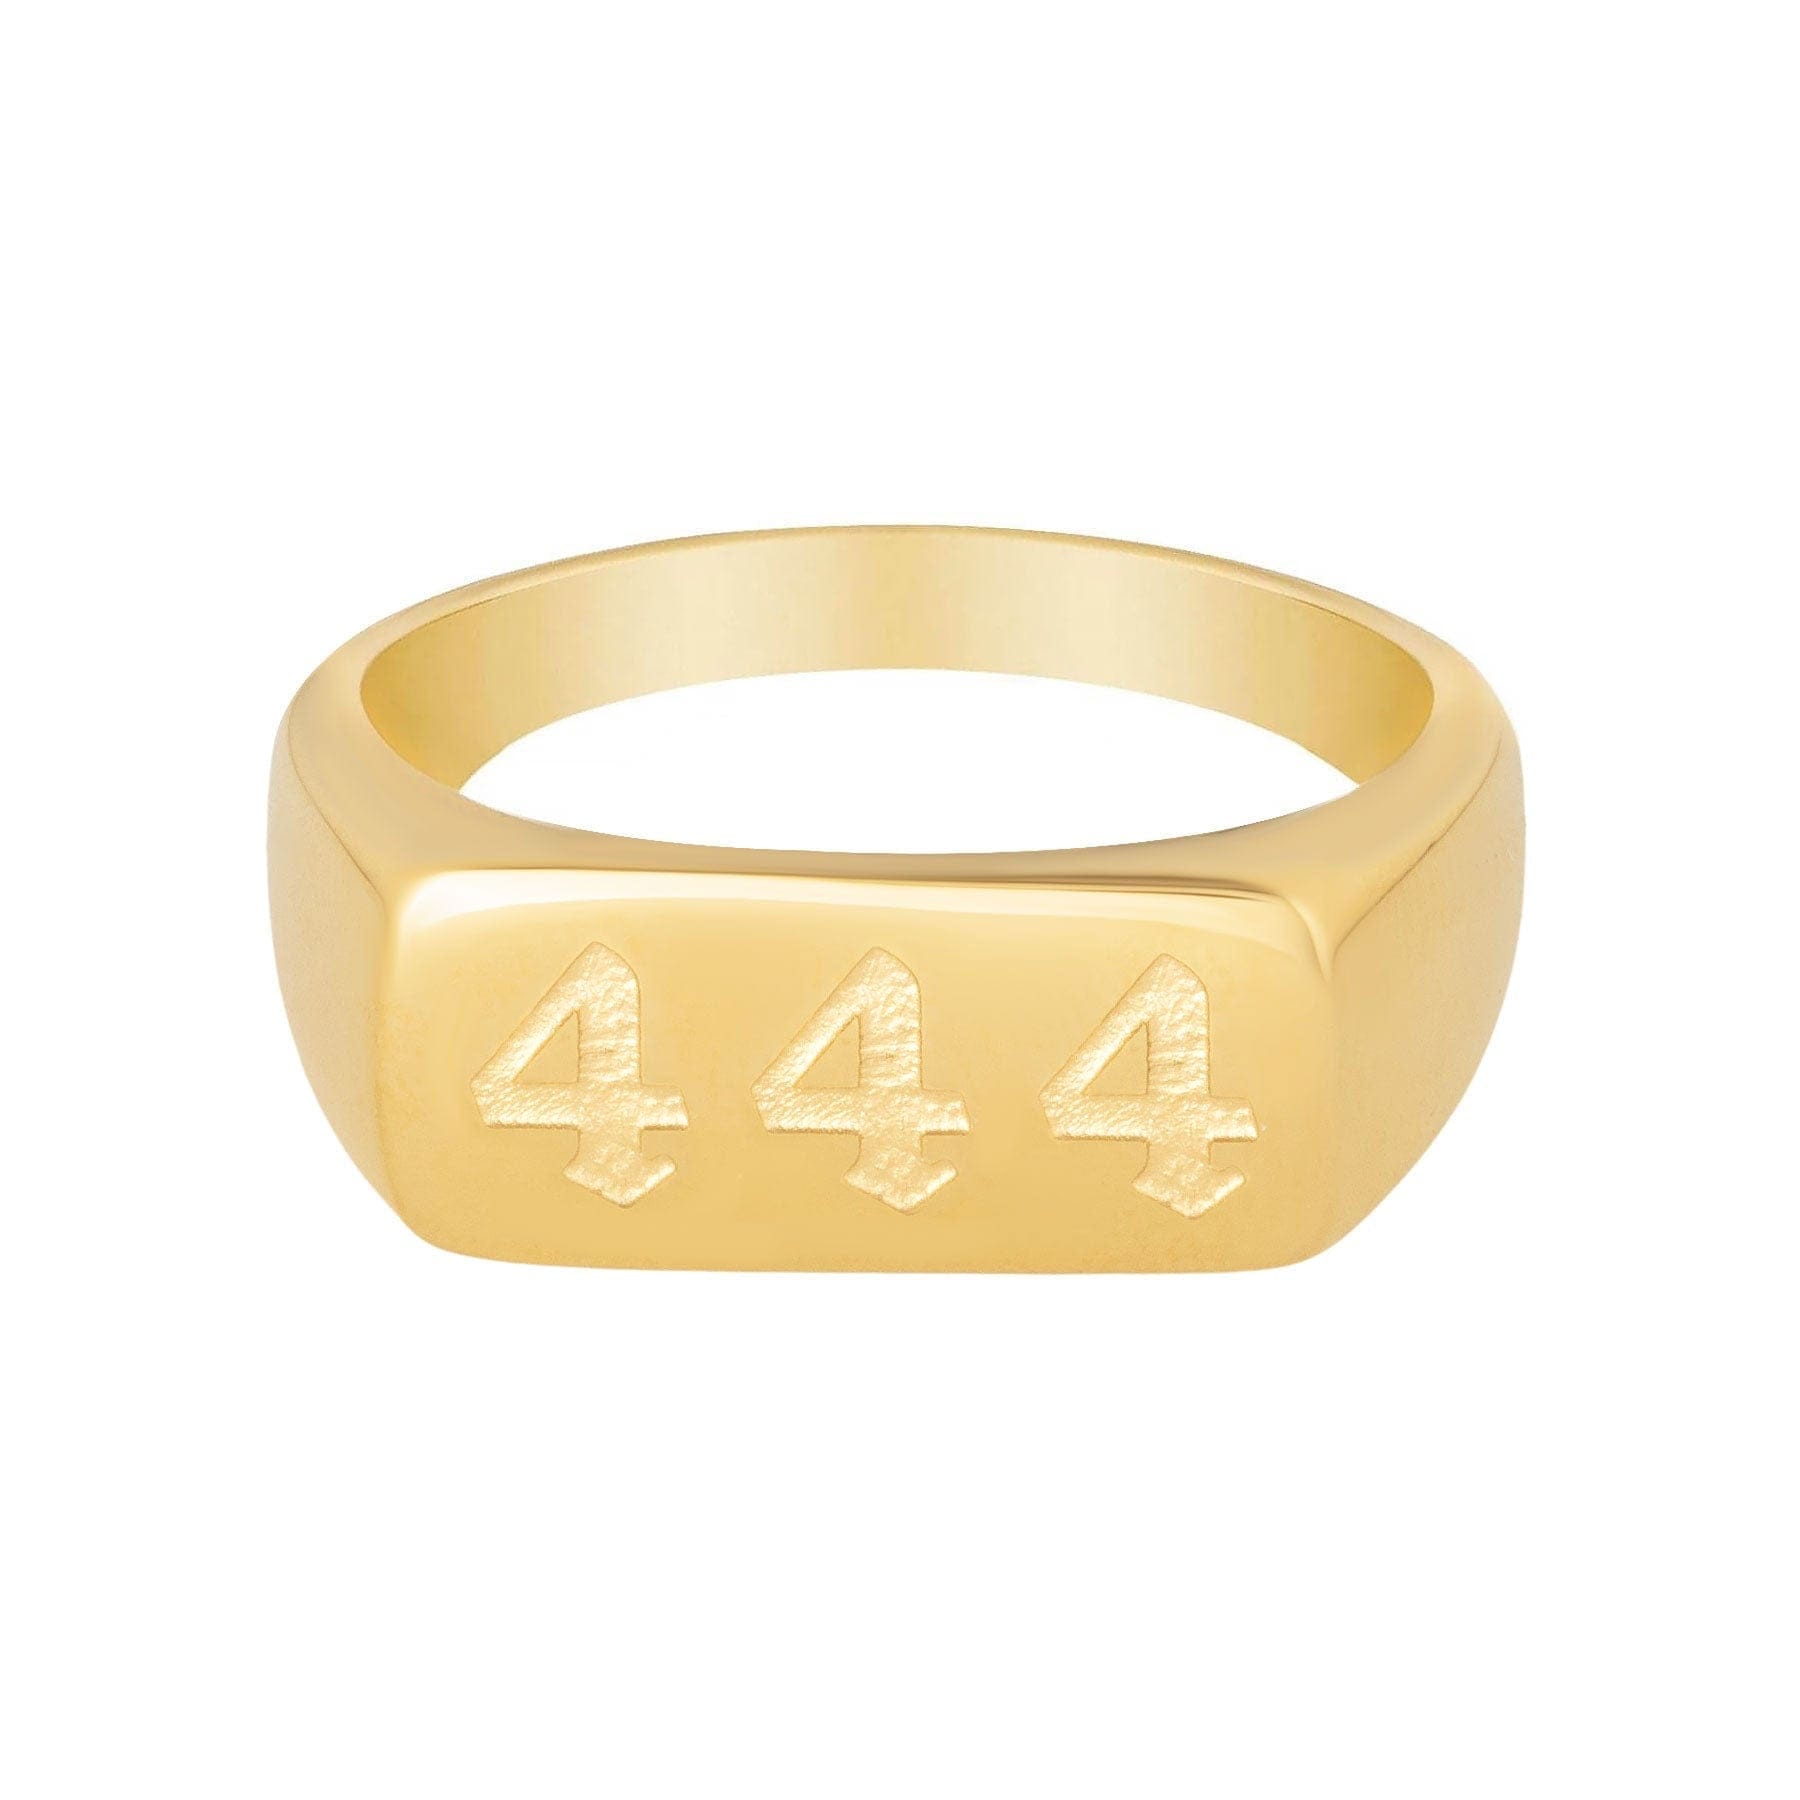 BohoMoon Stainless Steel Angel Numbers Ring Gold / 444 / US 6 / UK L / EUR 51 (small)